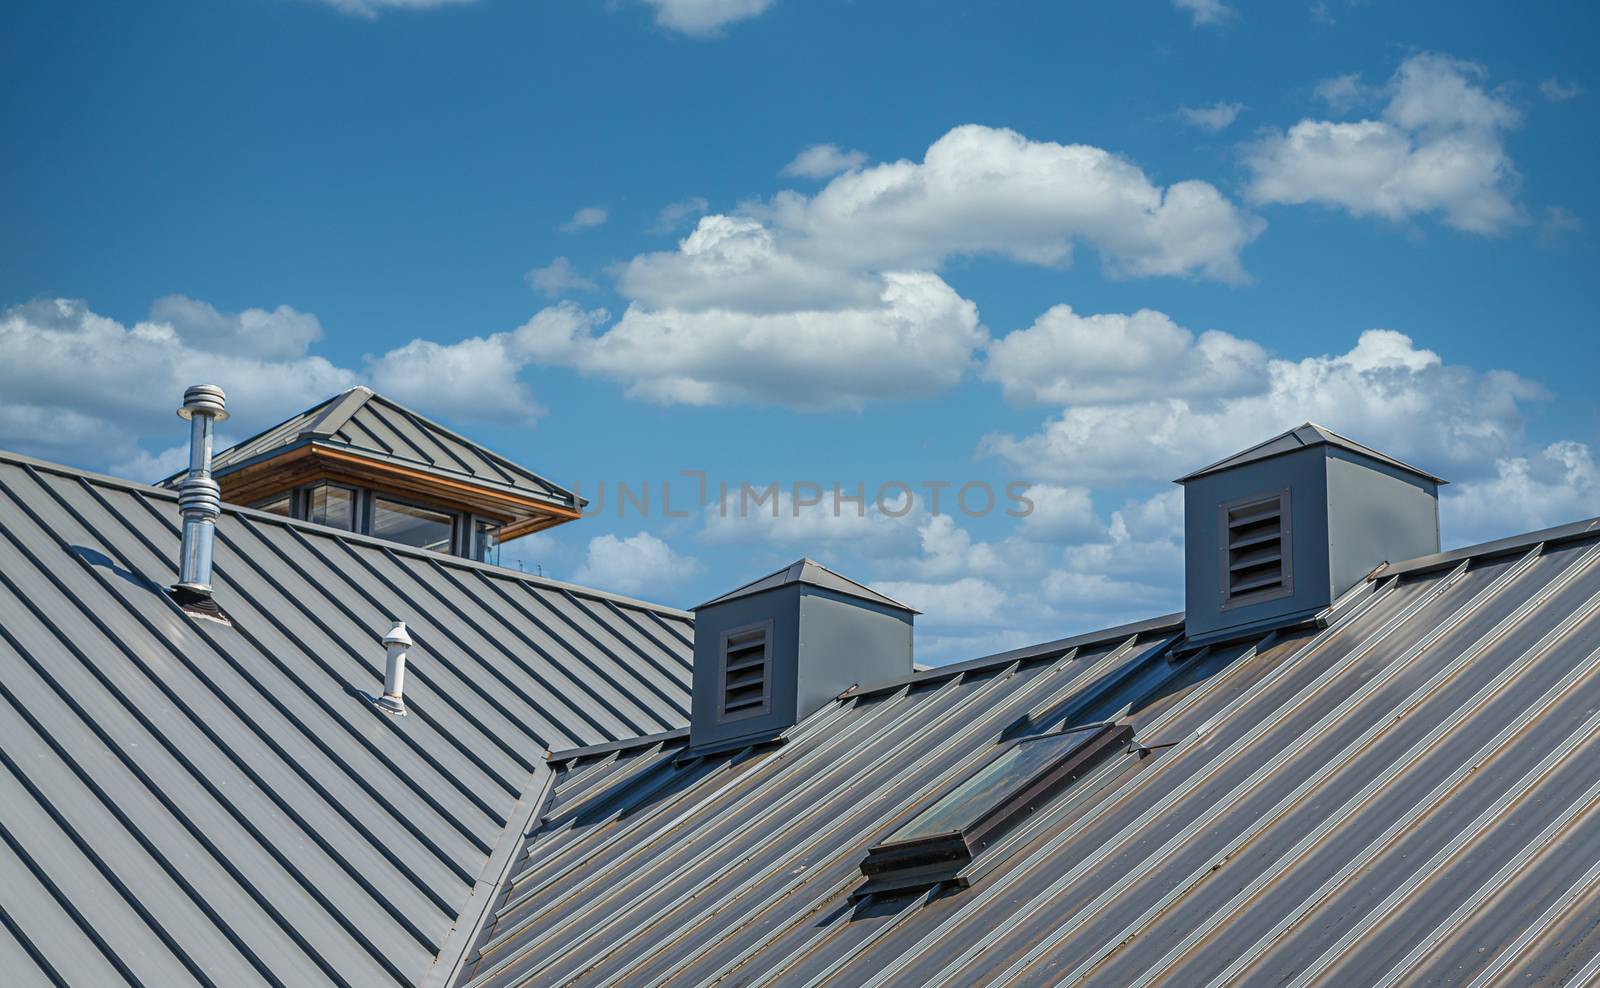 Metal Roof Under Blue Sky by dbvirago